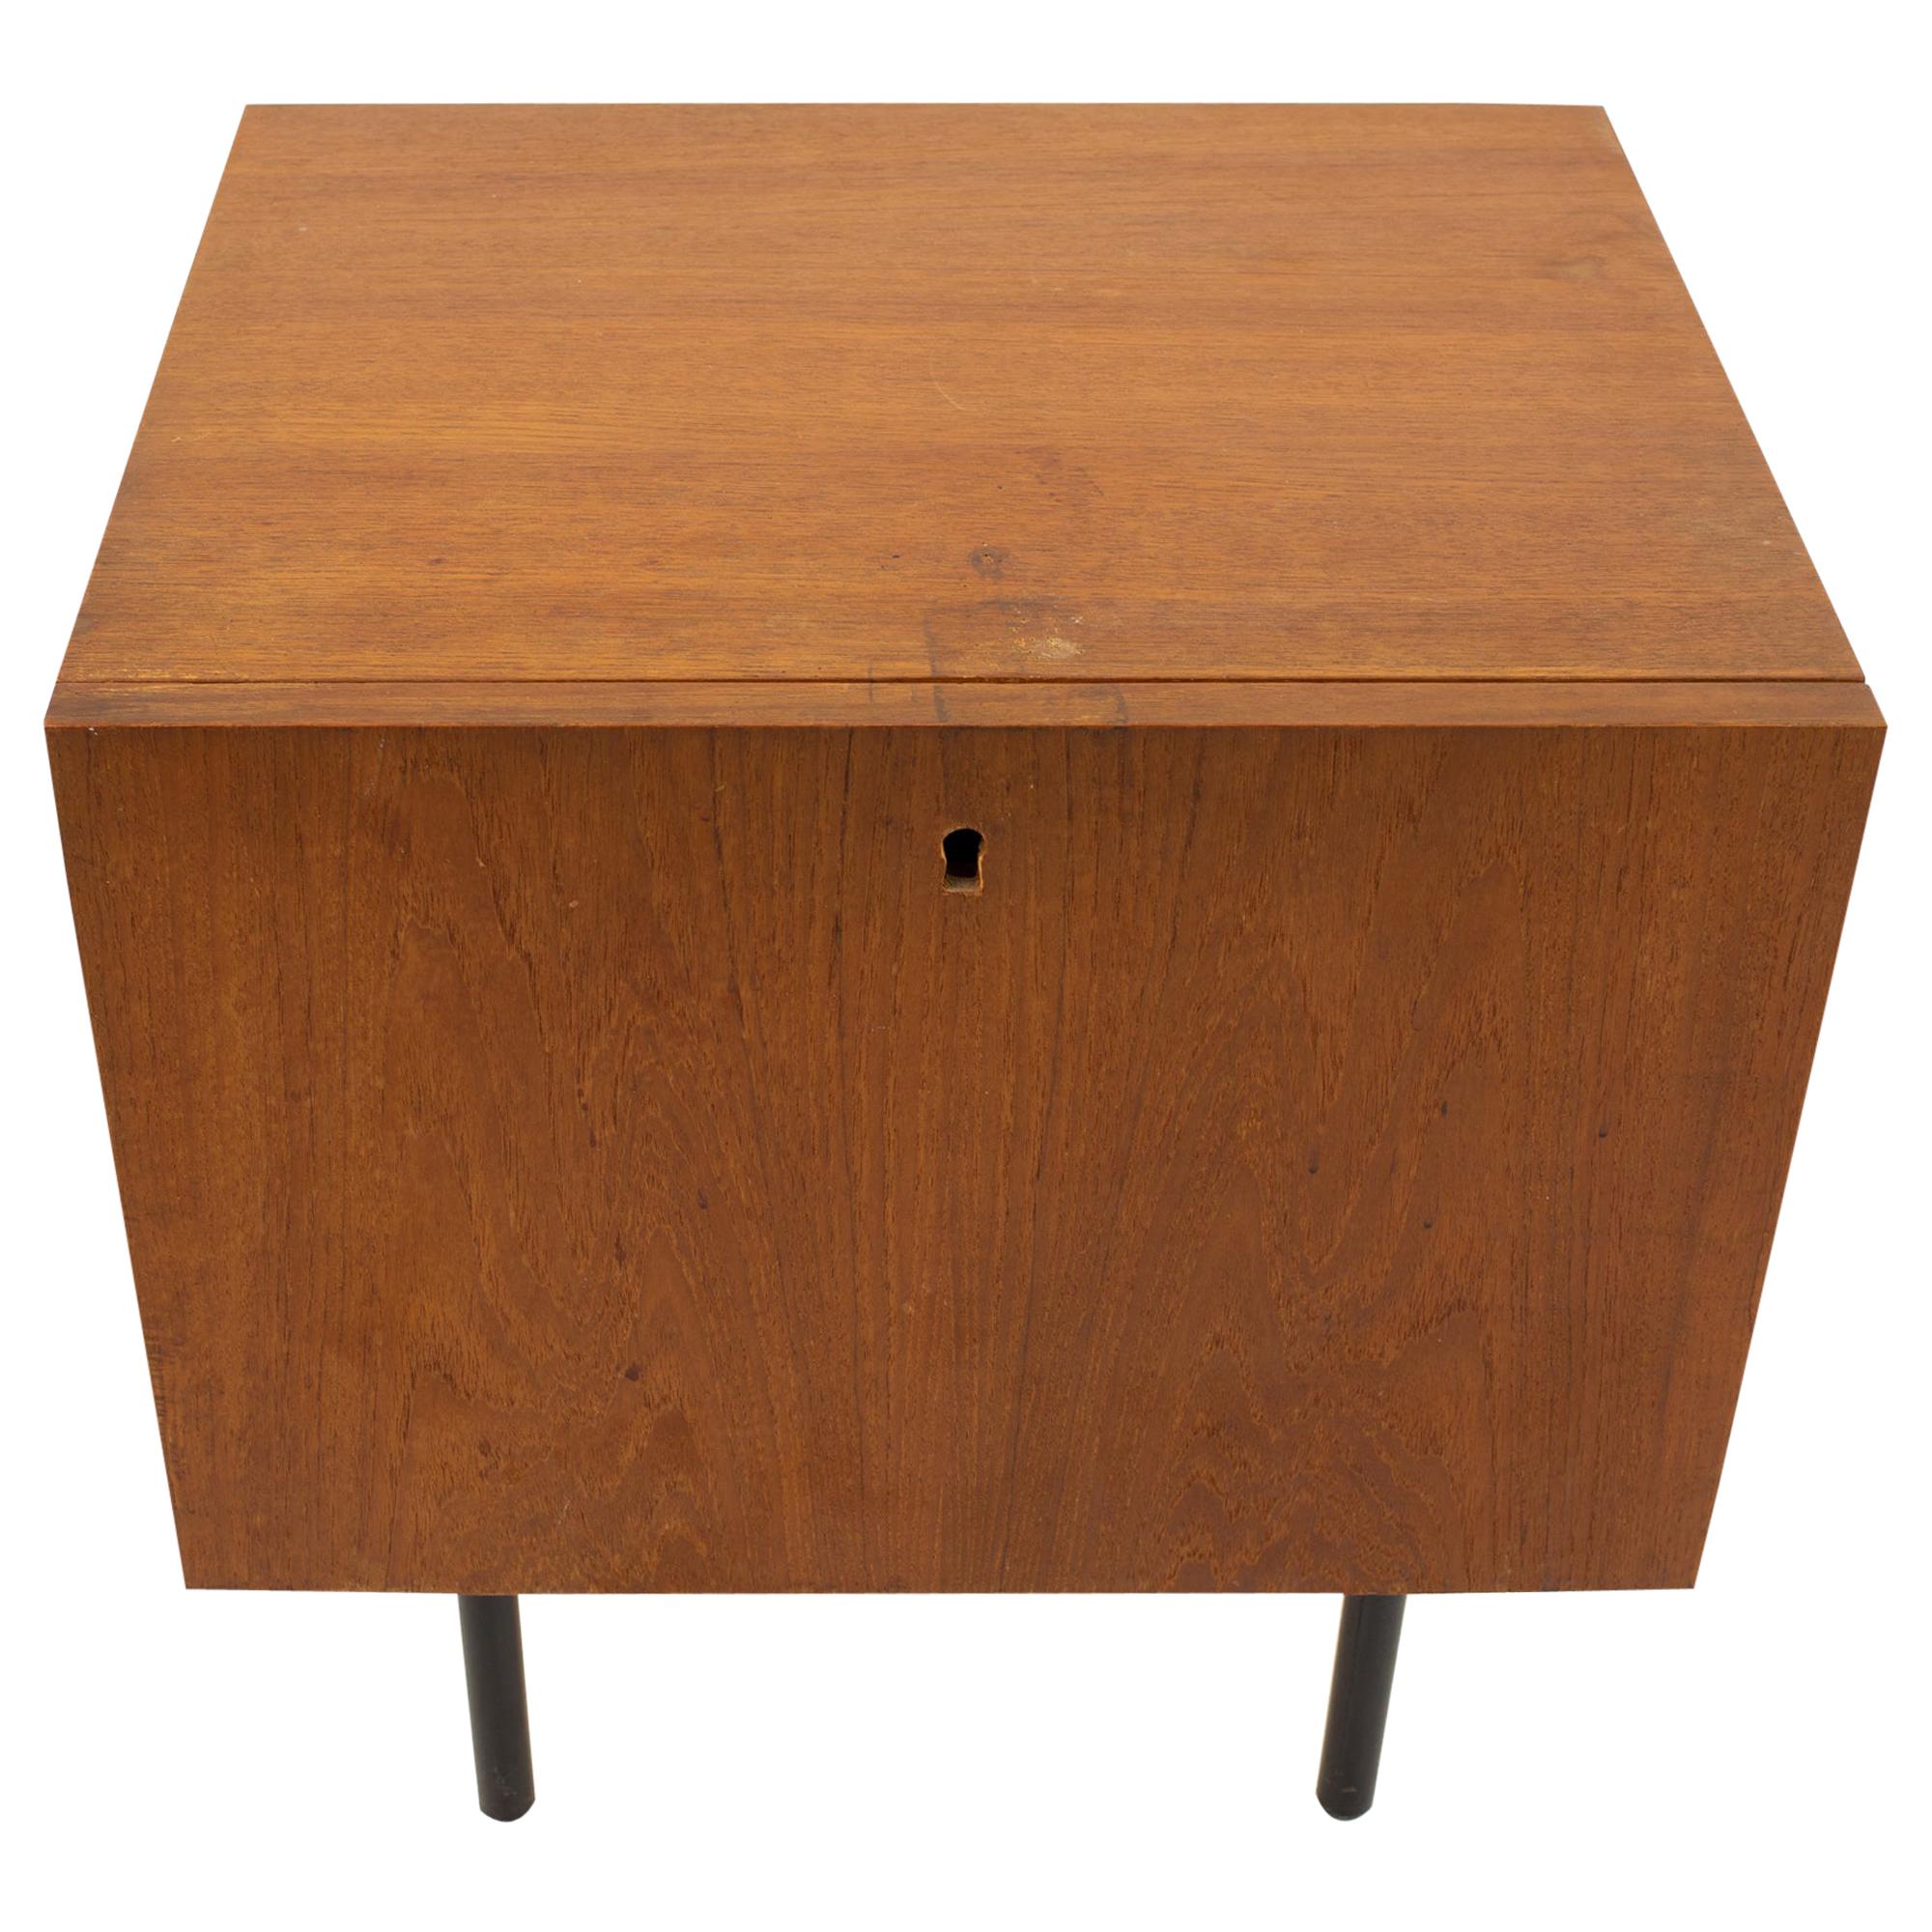 Danish Teak Mid Century Key Holder Nightstand

Nightstand measures: 19.5 wide x 16.5 deep x 20.5 high

This price includes getting this piece in what we call Restored Vintage Condition. That means the piece is permanently fixed upon purchase so